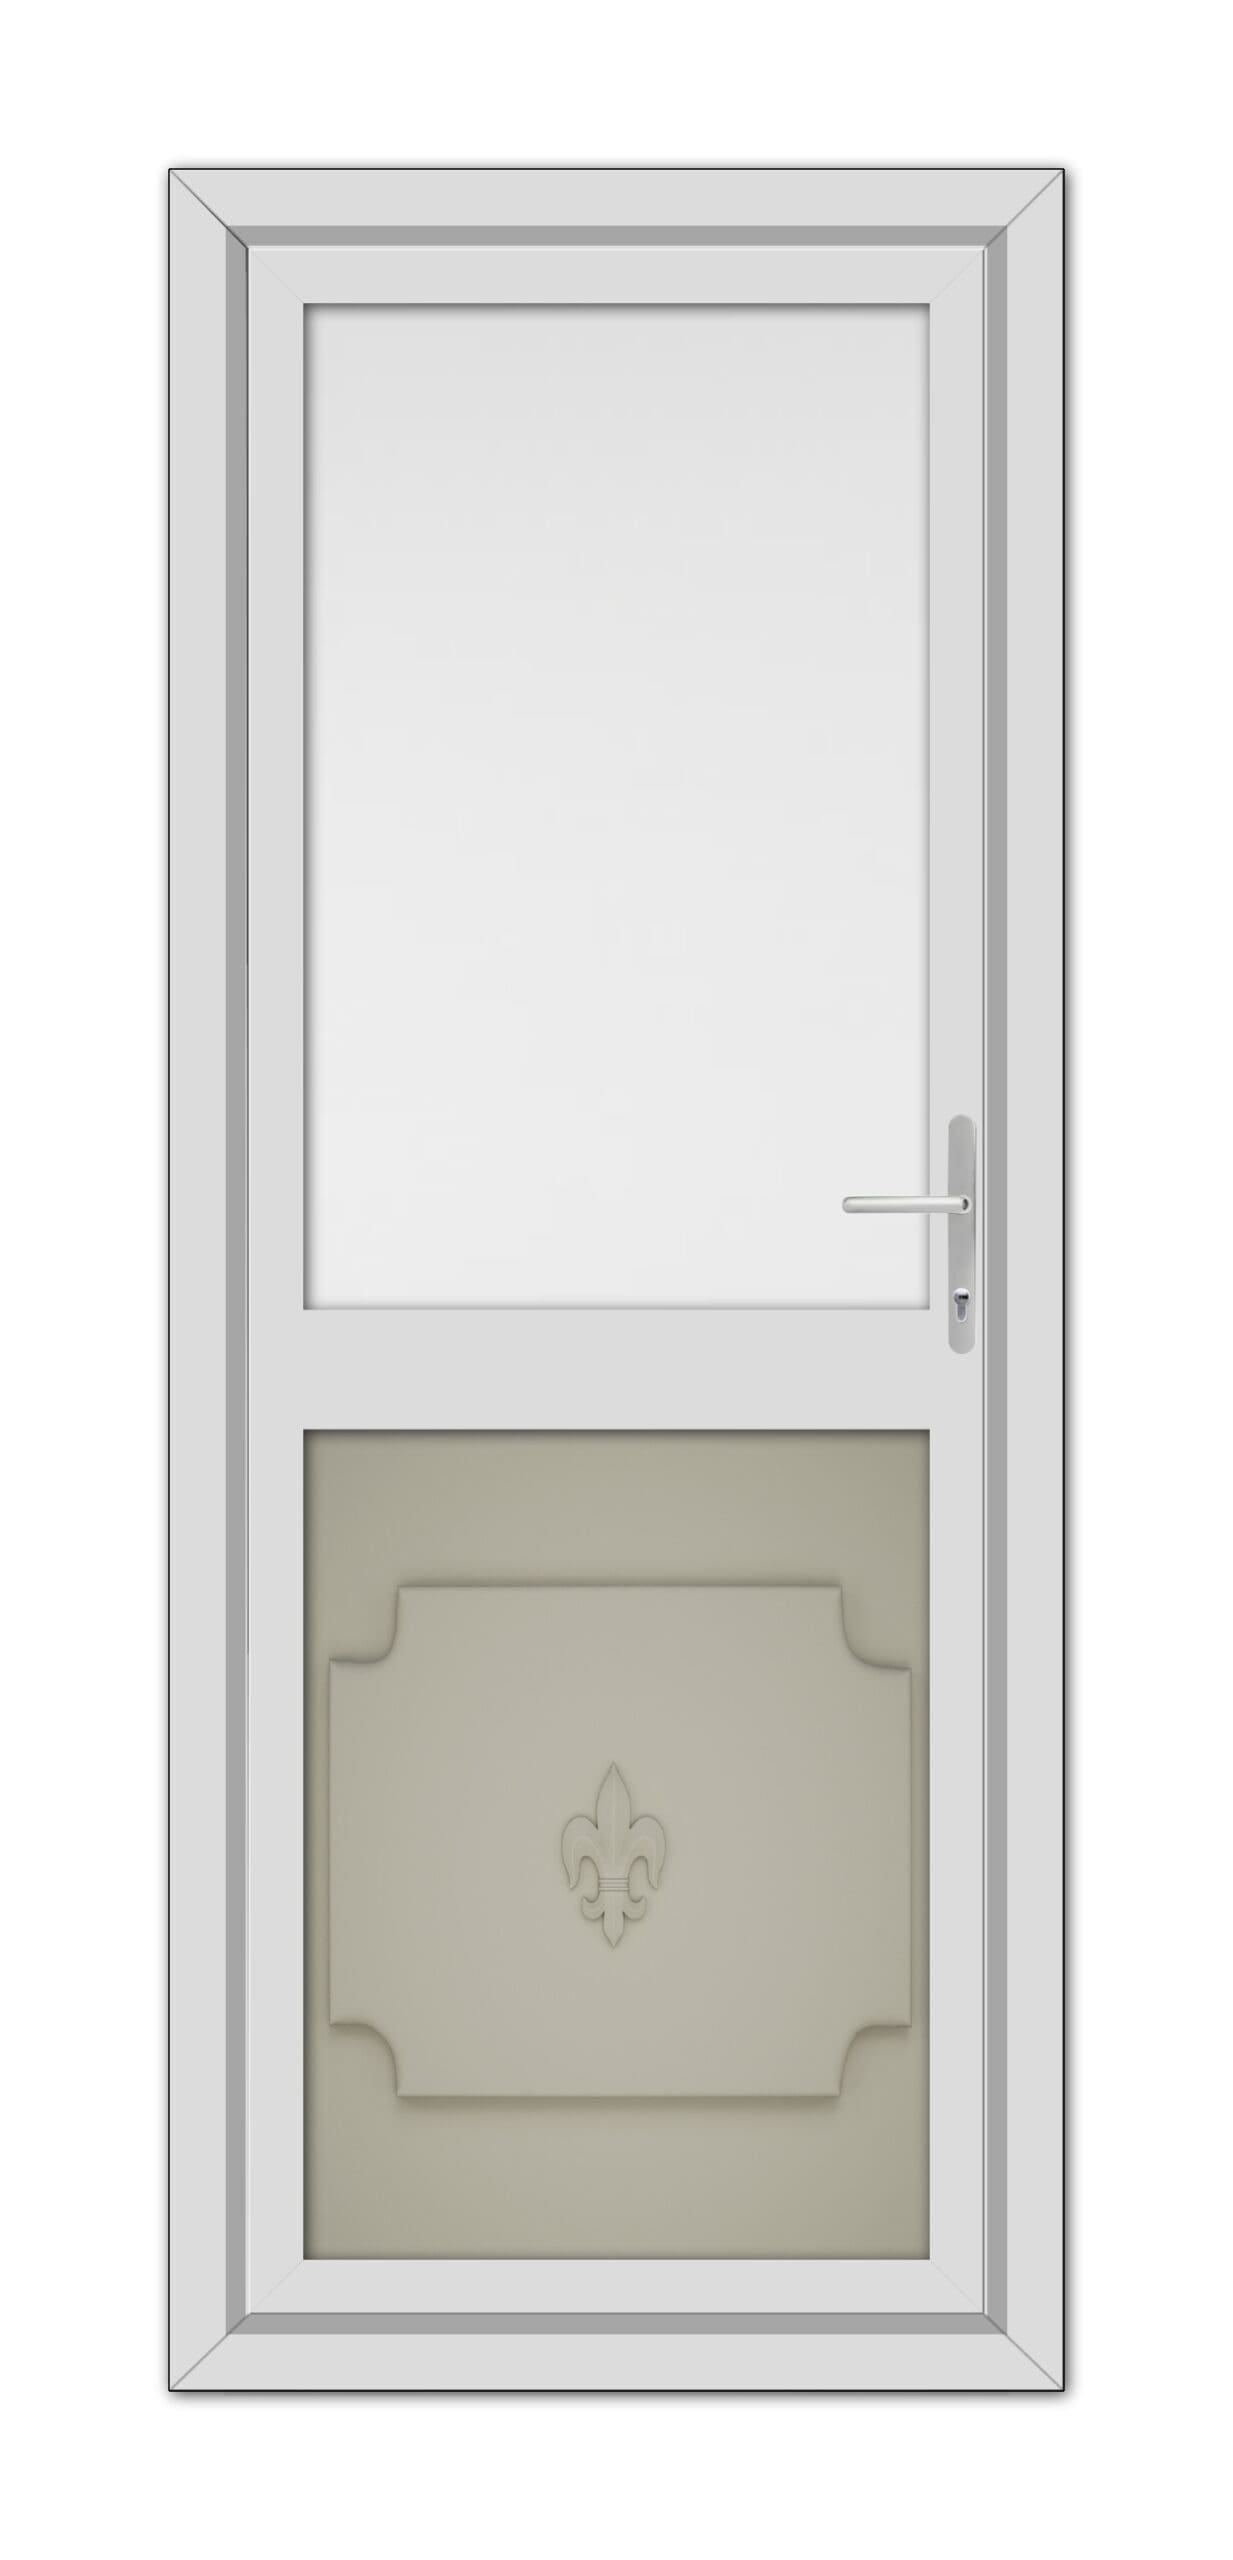 A modern Pebble Grey Abbey Half uPVC Back Door with a lower pane featuring a decorative fleur-de-lis design, complemented by a simple metallic handle on the right side.